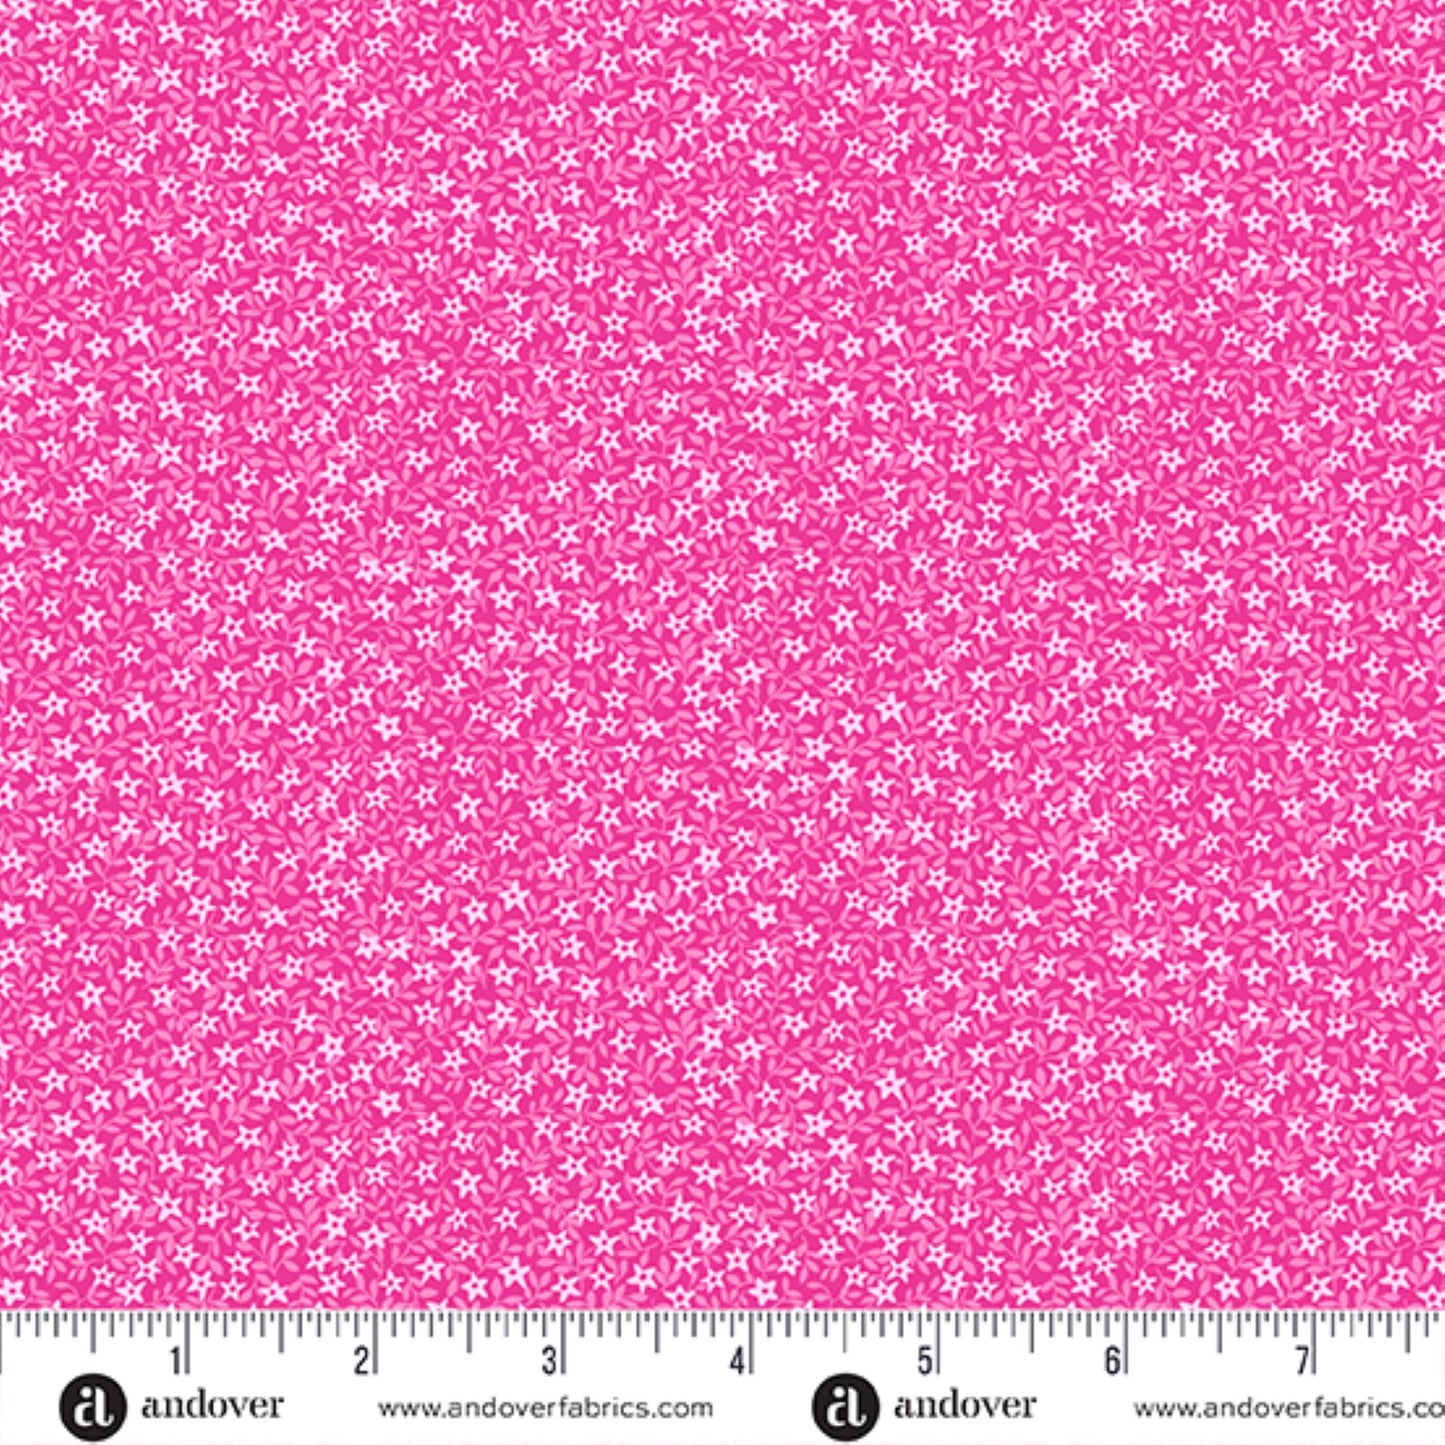 Country Cuttings florals pink lilac bundle - 6 Fat Quarters cotton quilt fabric by Makower UK